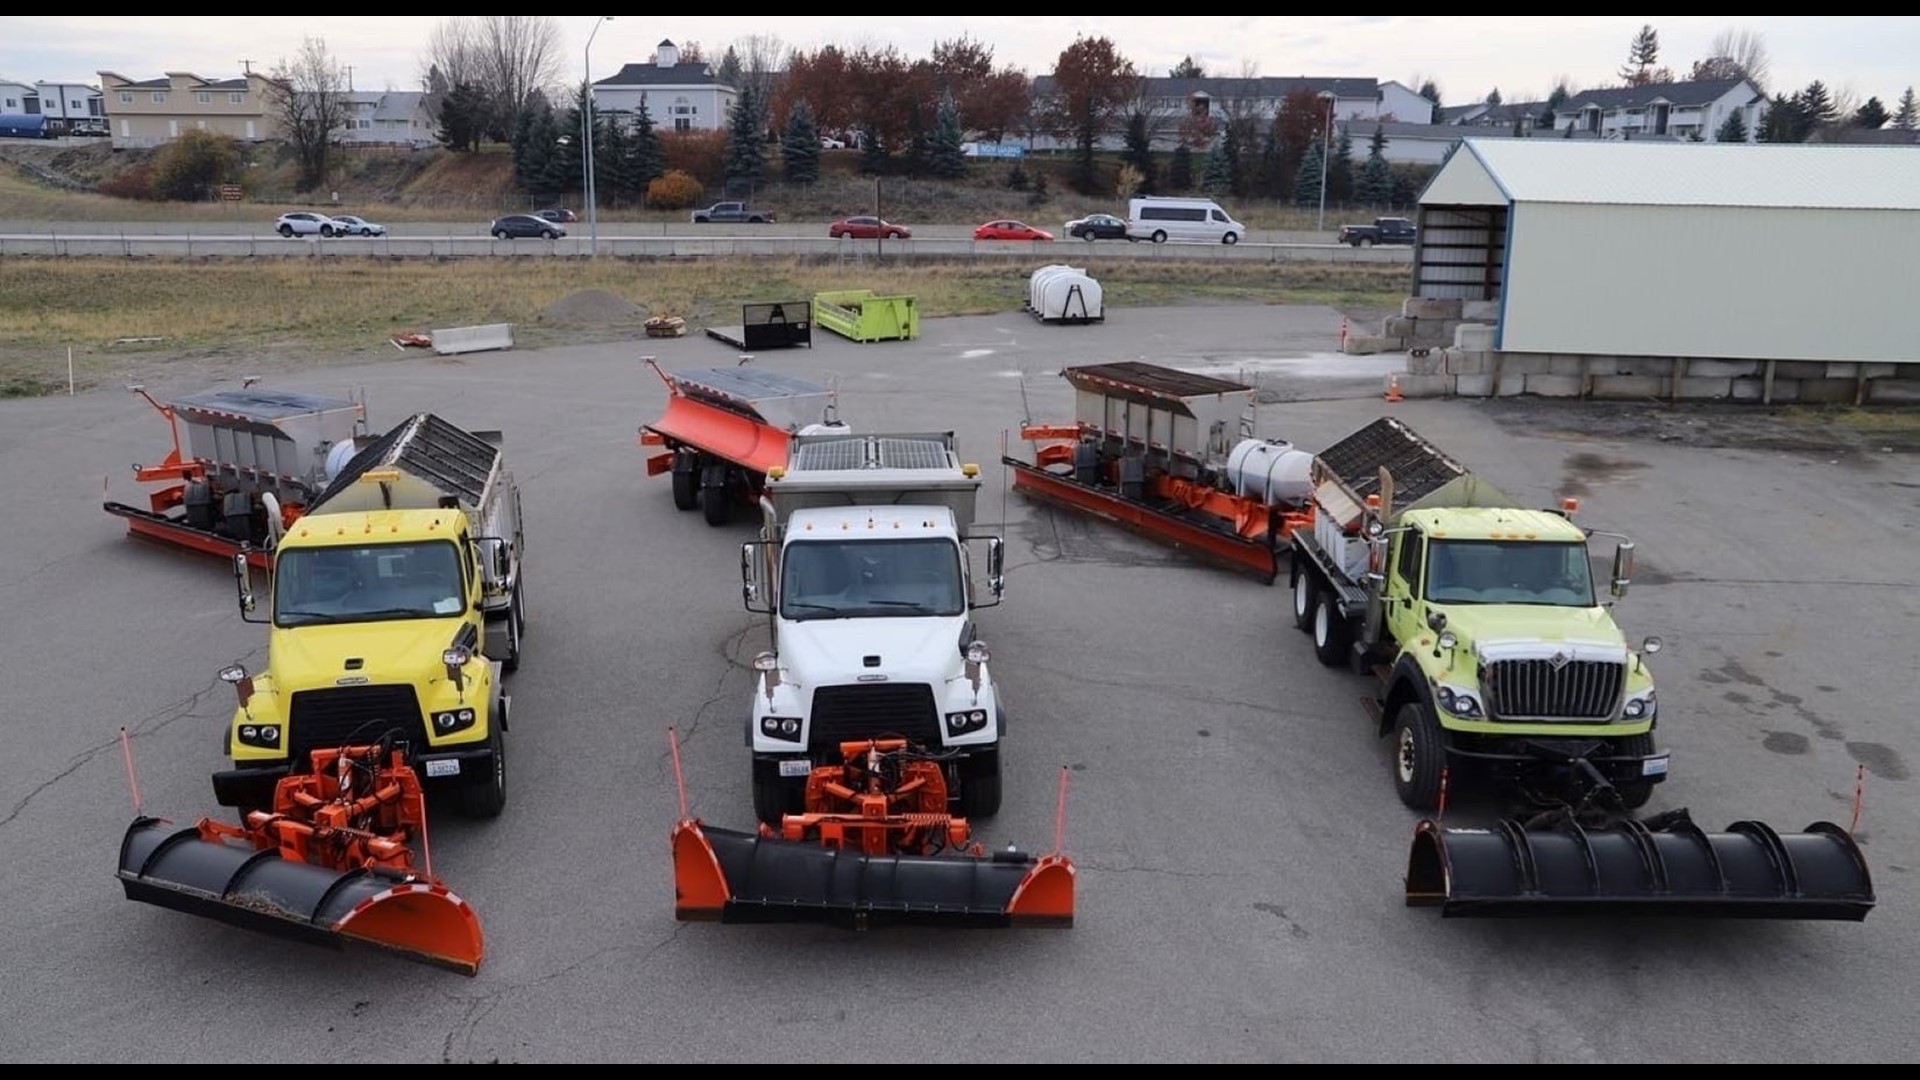 People have until April 1 at noon to vote for their favorite tow plow names, which include Betty Whiteout, Darth Blader, Plow Chicka Plow Plow, and Plowasaurus Rex.